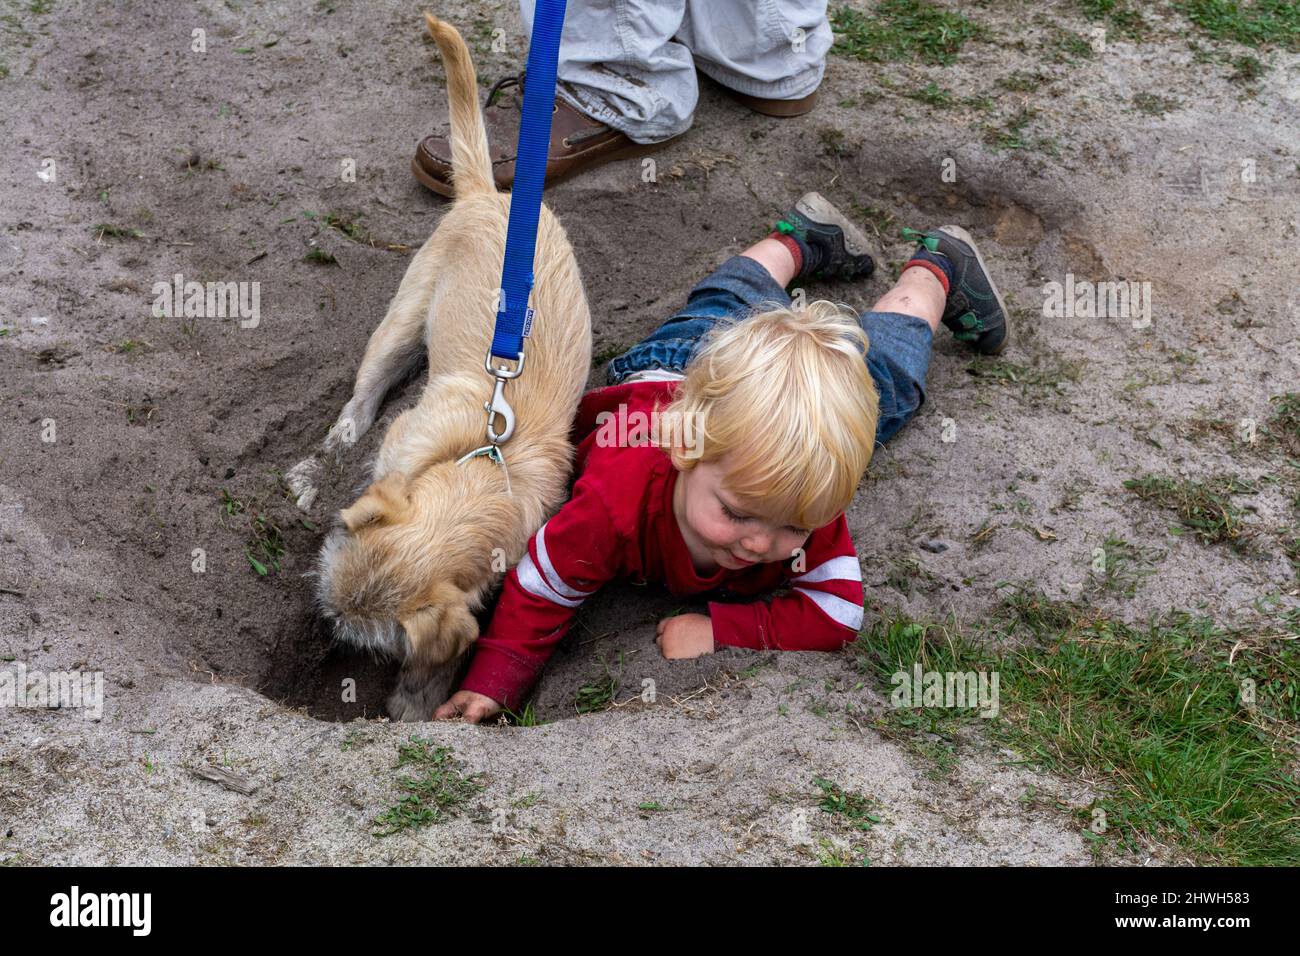 Small child playing in the dirt with a pet dog, digging a hole. Concept of children playing outside in nature - healthy childhood- natural immunity Stock Photo